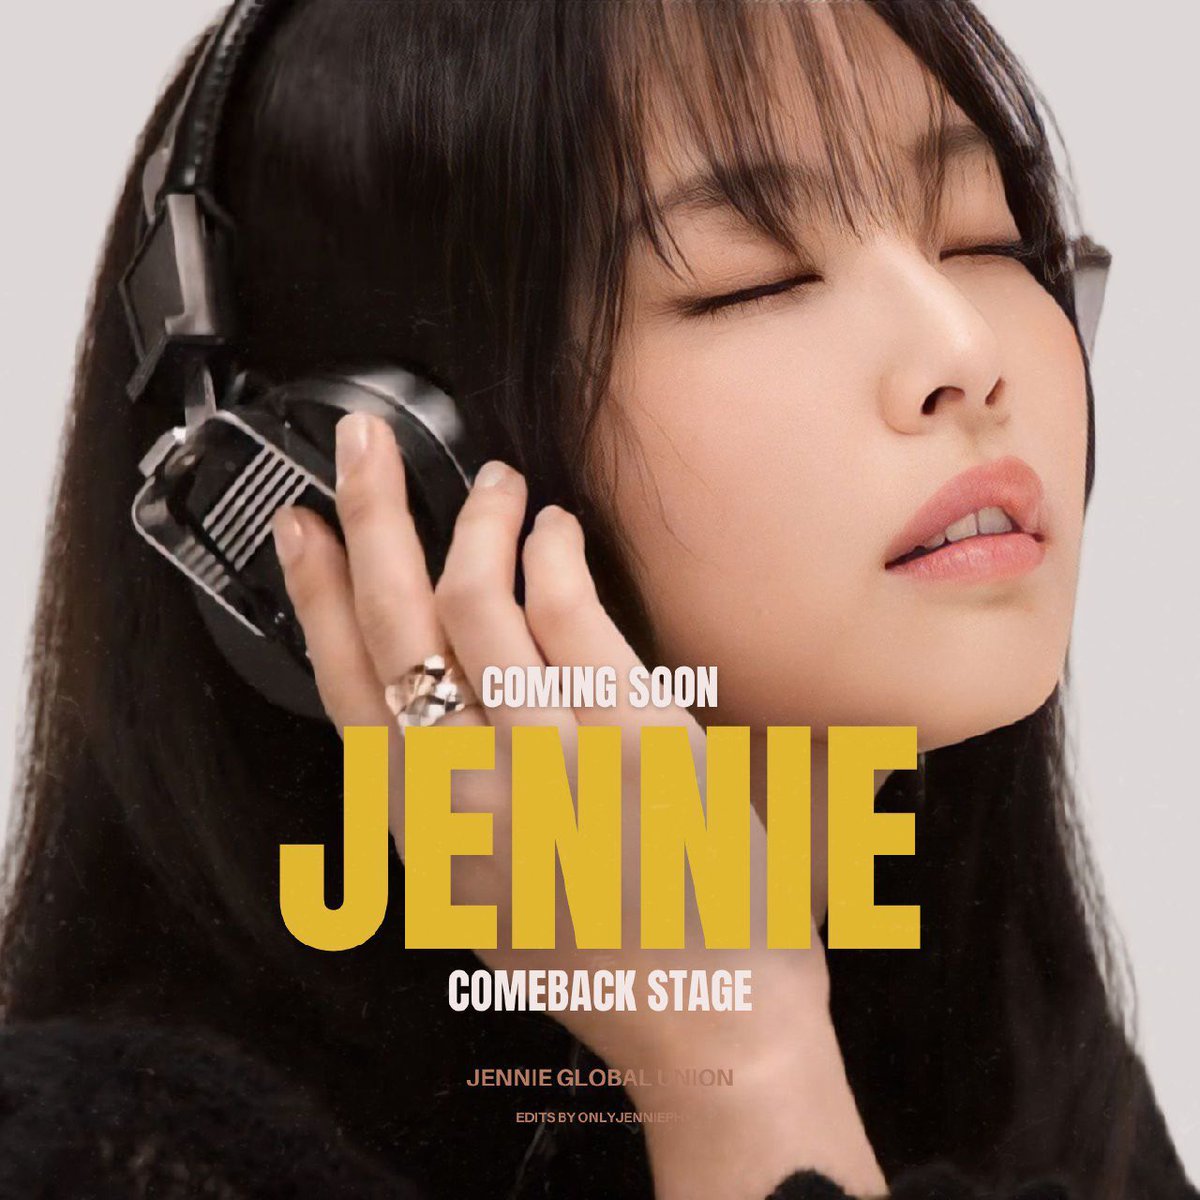 JNK1 IS COMING. Let's contribute to its physical sales by donating to the 'Non-shipped Albums Donation for JENNIE Solo Support' by JENNIE GLOBAL UNION Your $1 can go a long way for JNK1. Homepage: tinyurl.com/bdznhbet Donation page: tinyurl.com/JGU1USDPROJECT